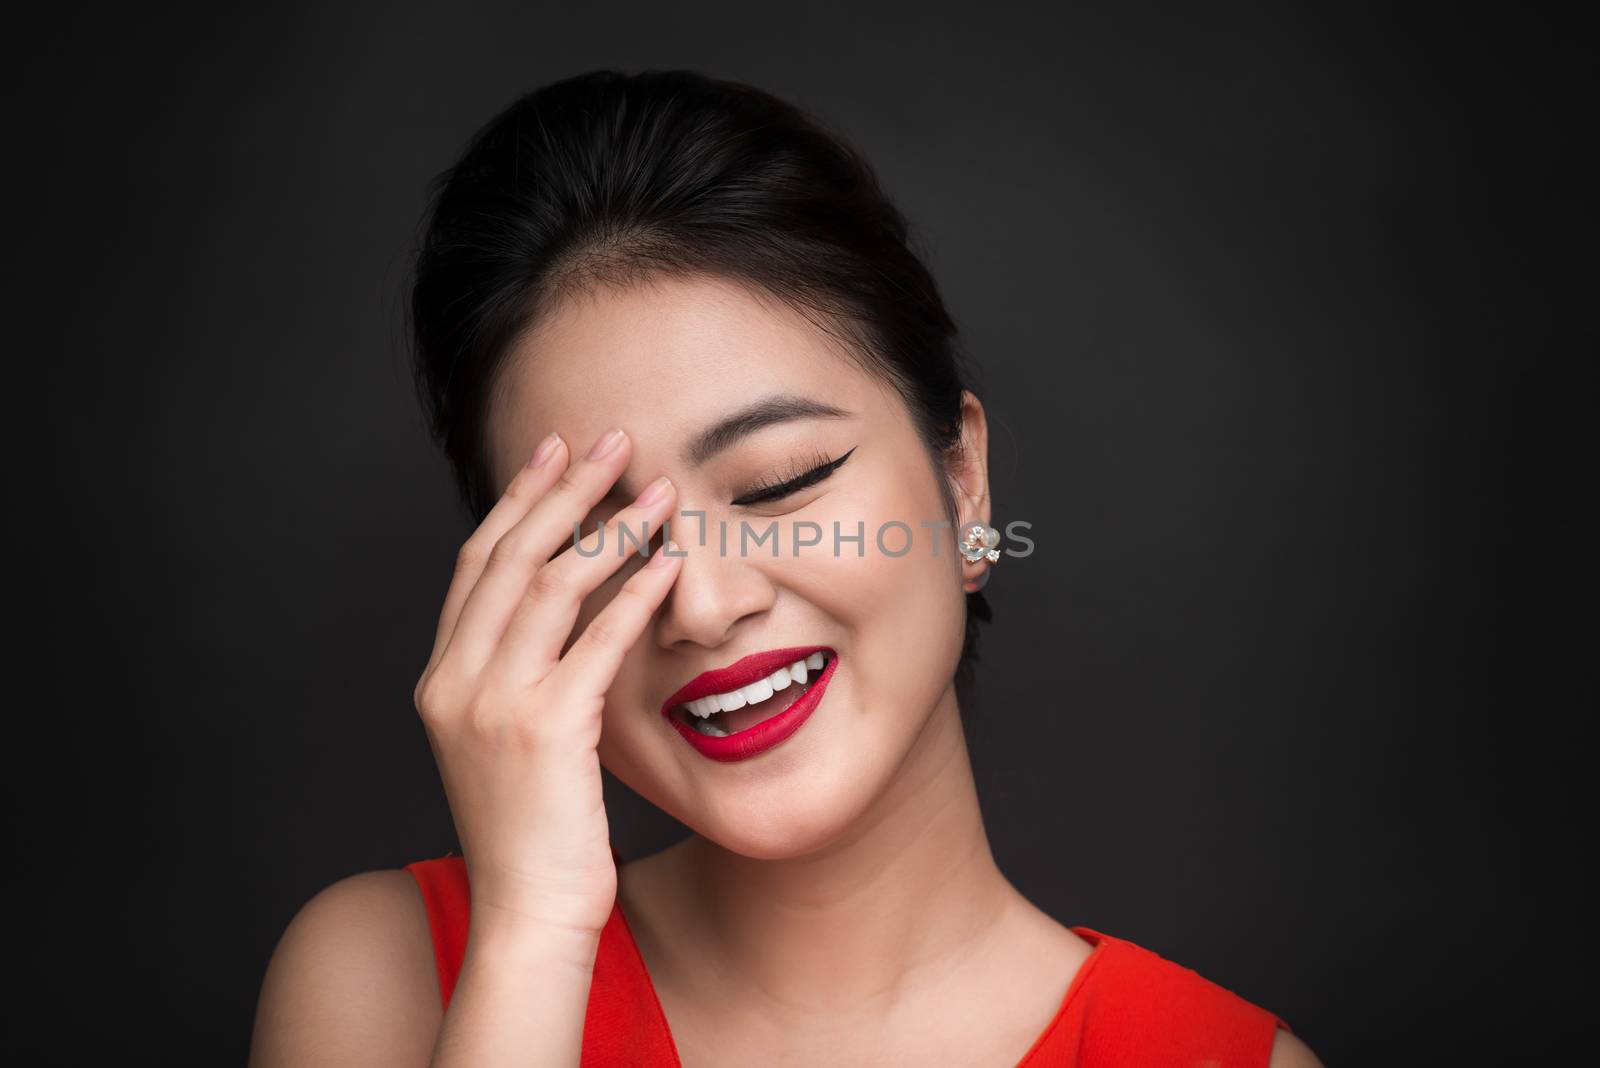 Smiling shy woman closed her face with a hand over black background.